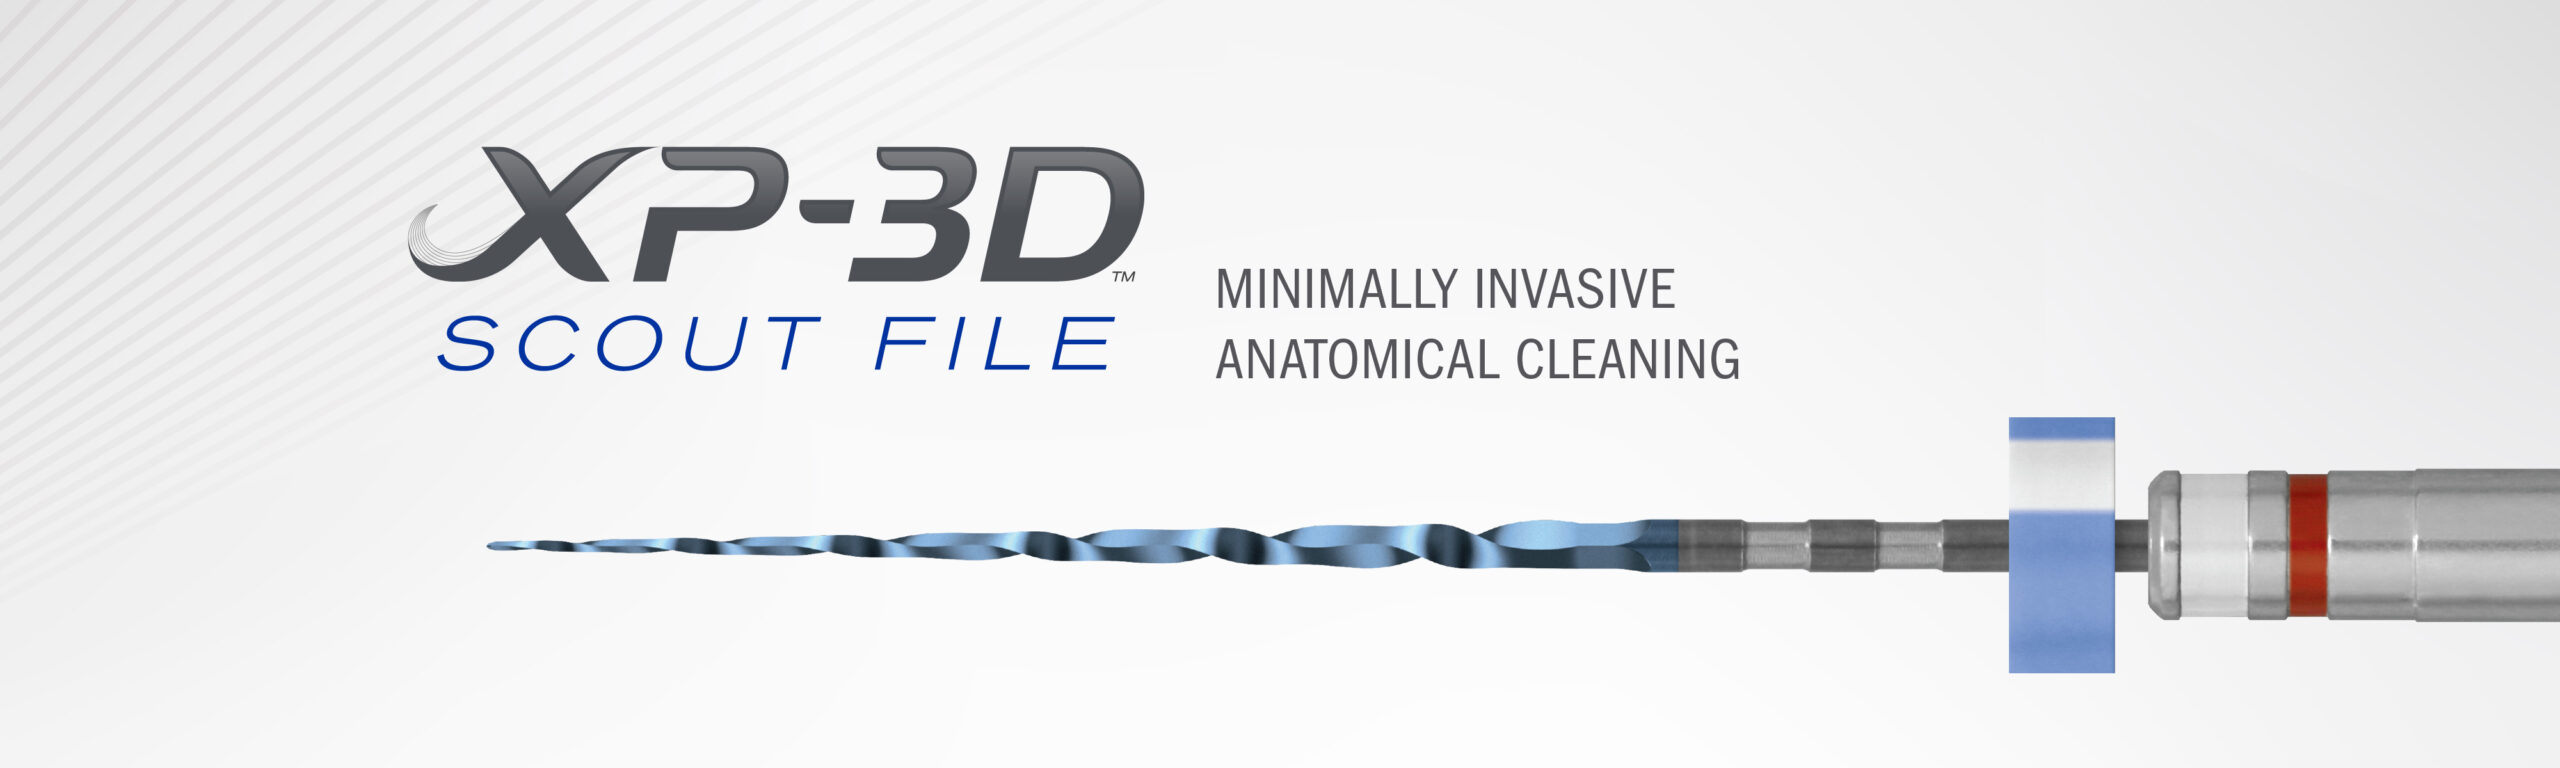 Xp-3D Finisher. Minimally Invasive. Anatomical Cleaning. By Brasseler USA